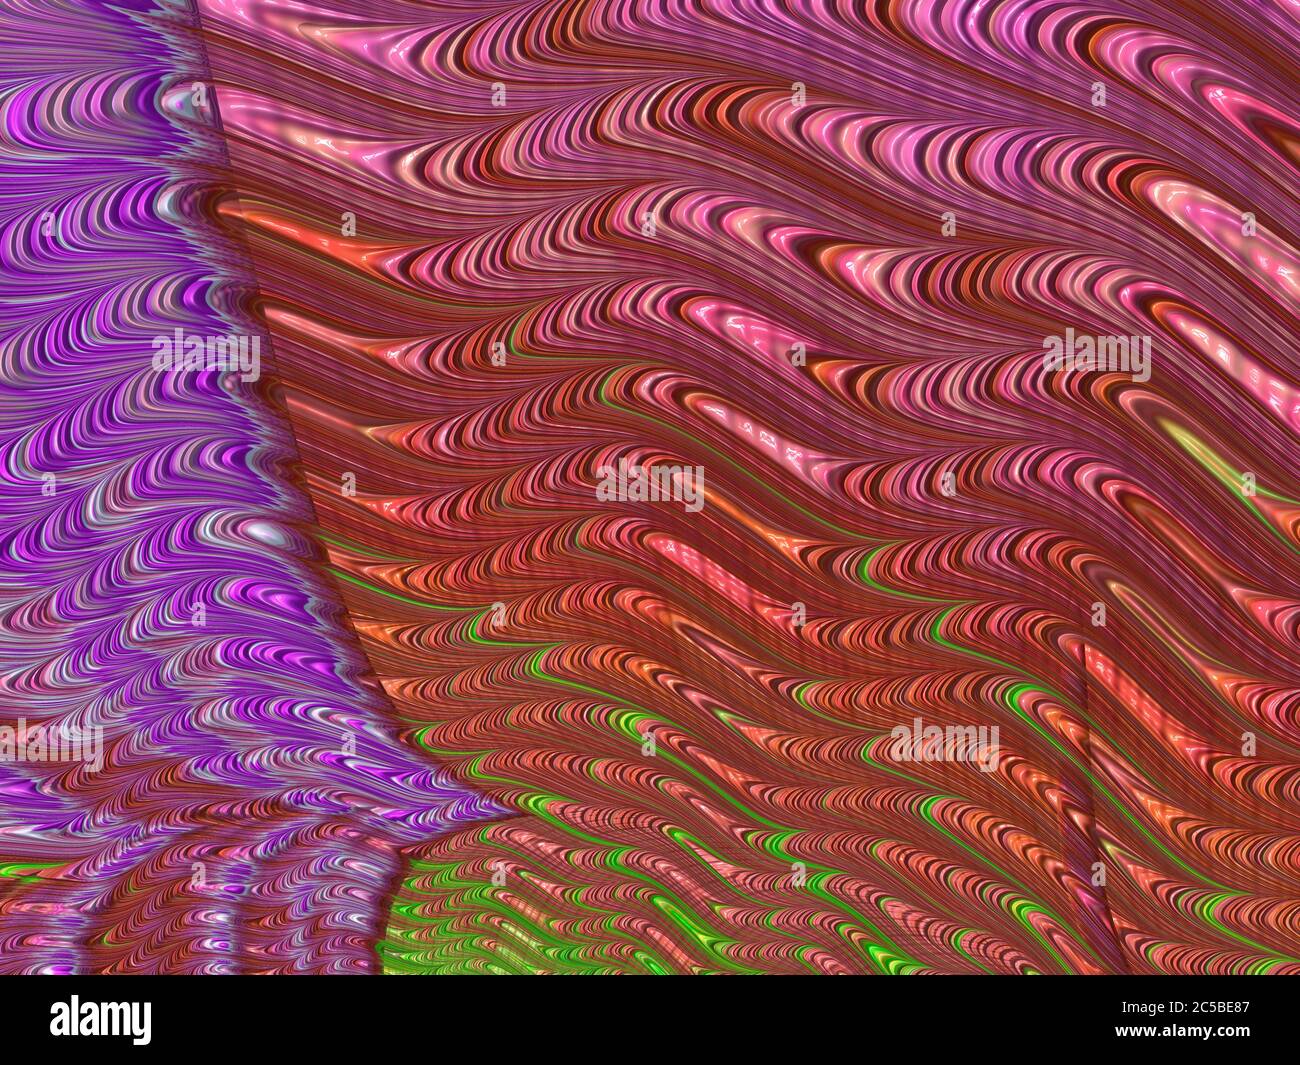 Colorful background pattern Stock Photo